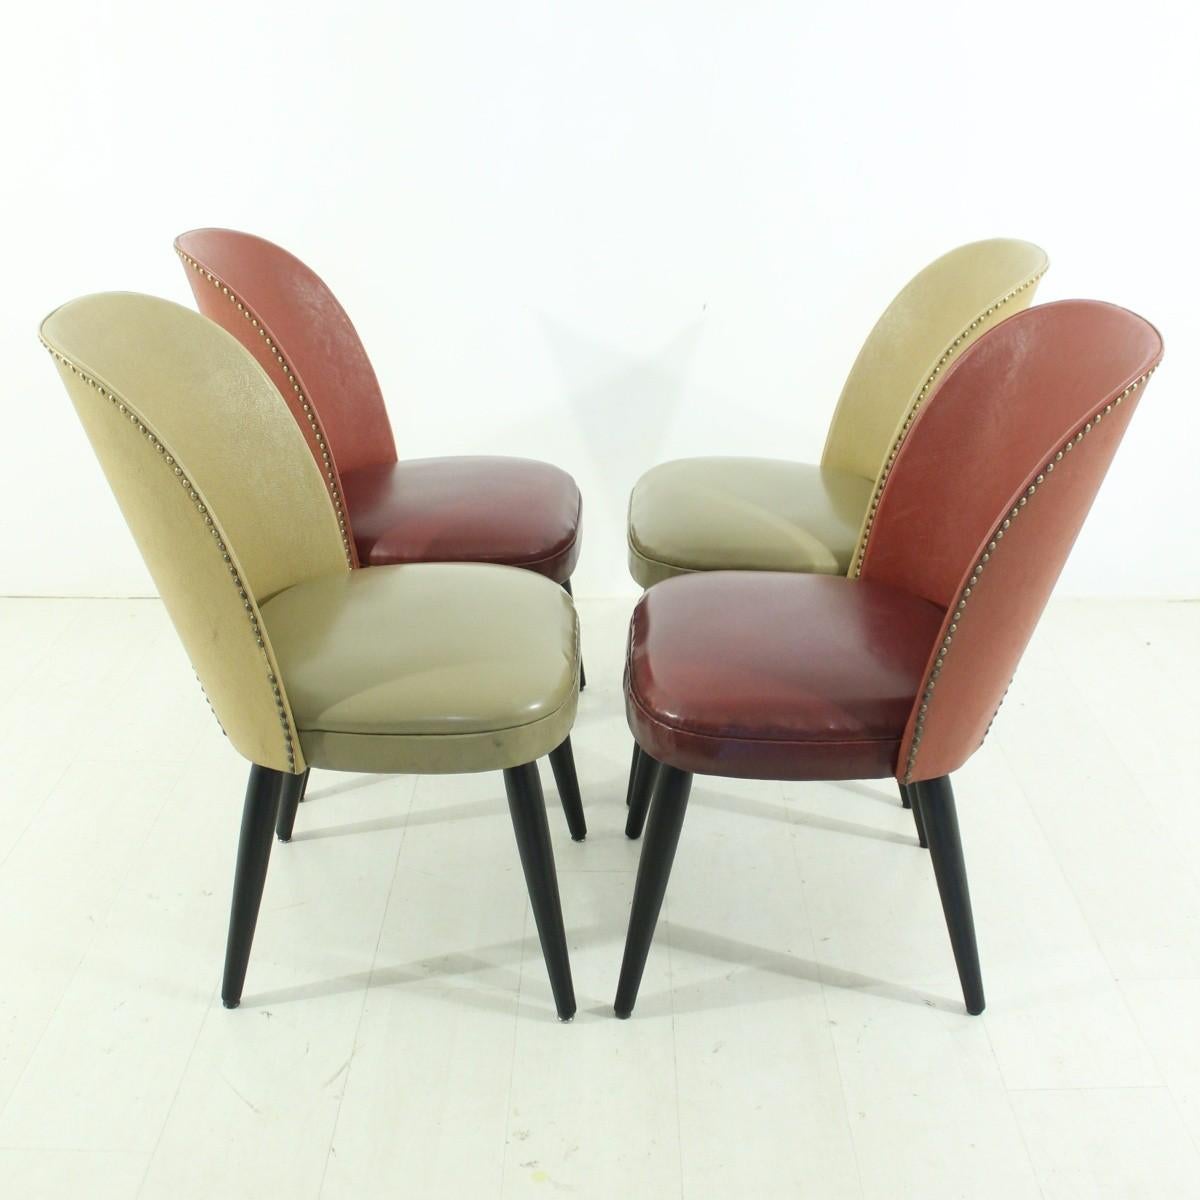 Mid-Century Modern Set of Four 1950s Rockabilly Chairs